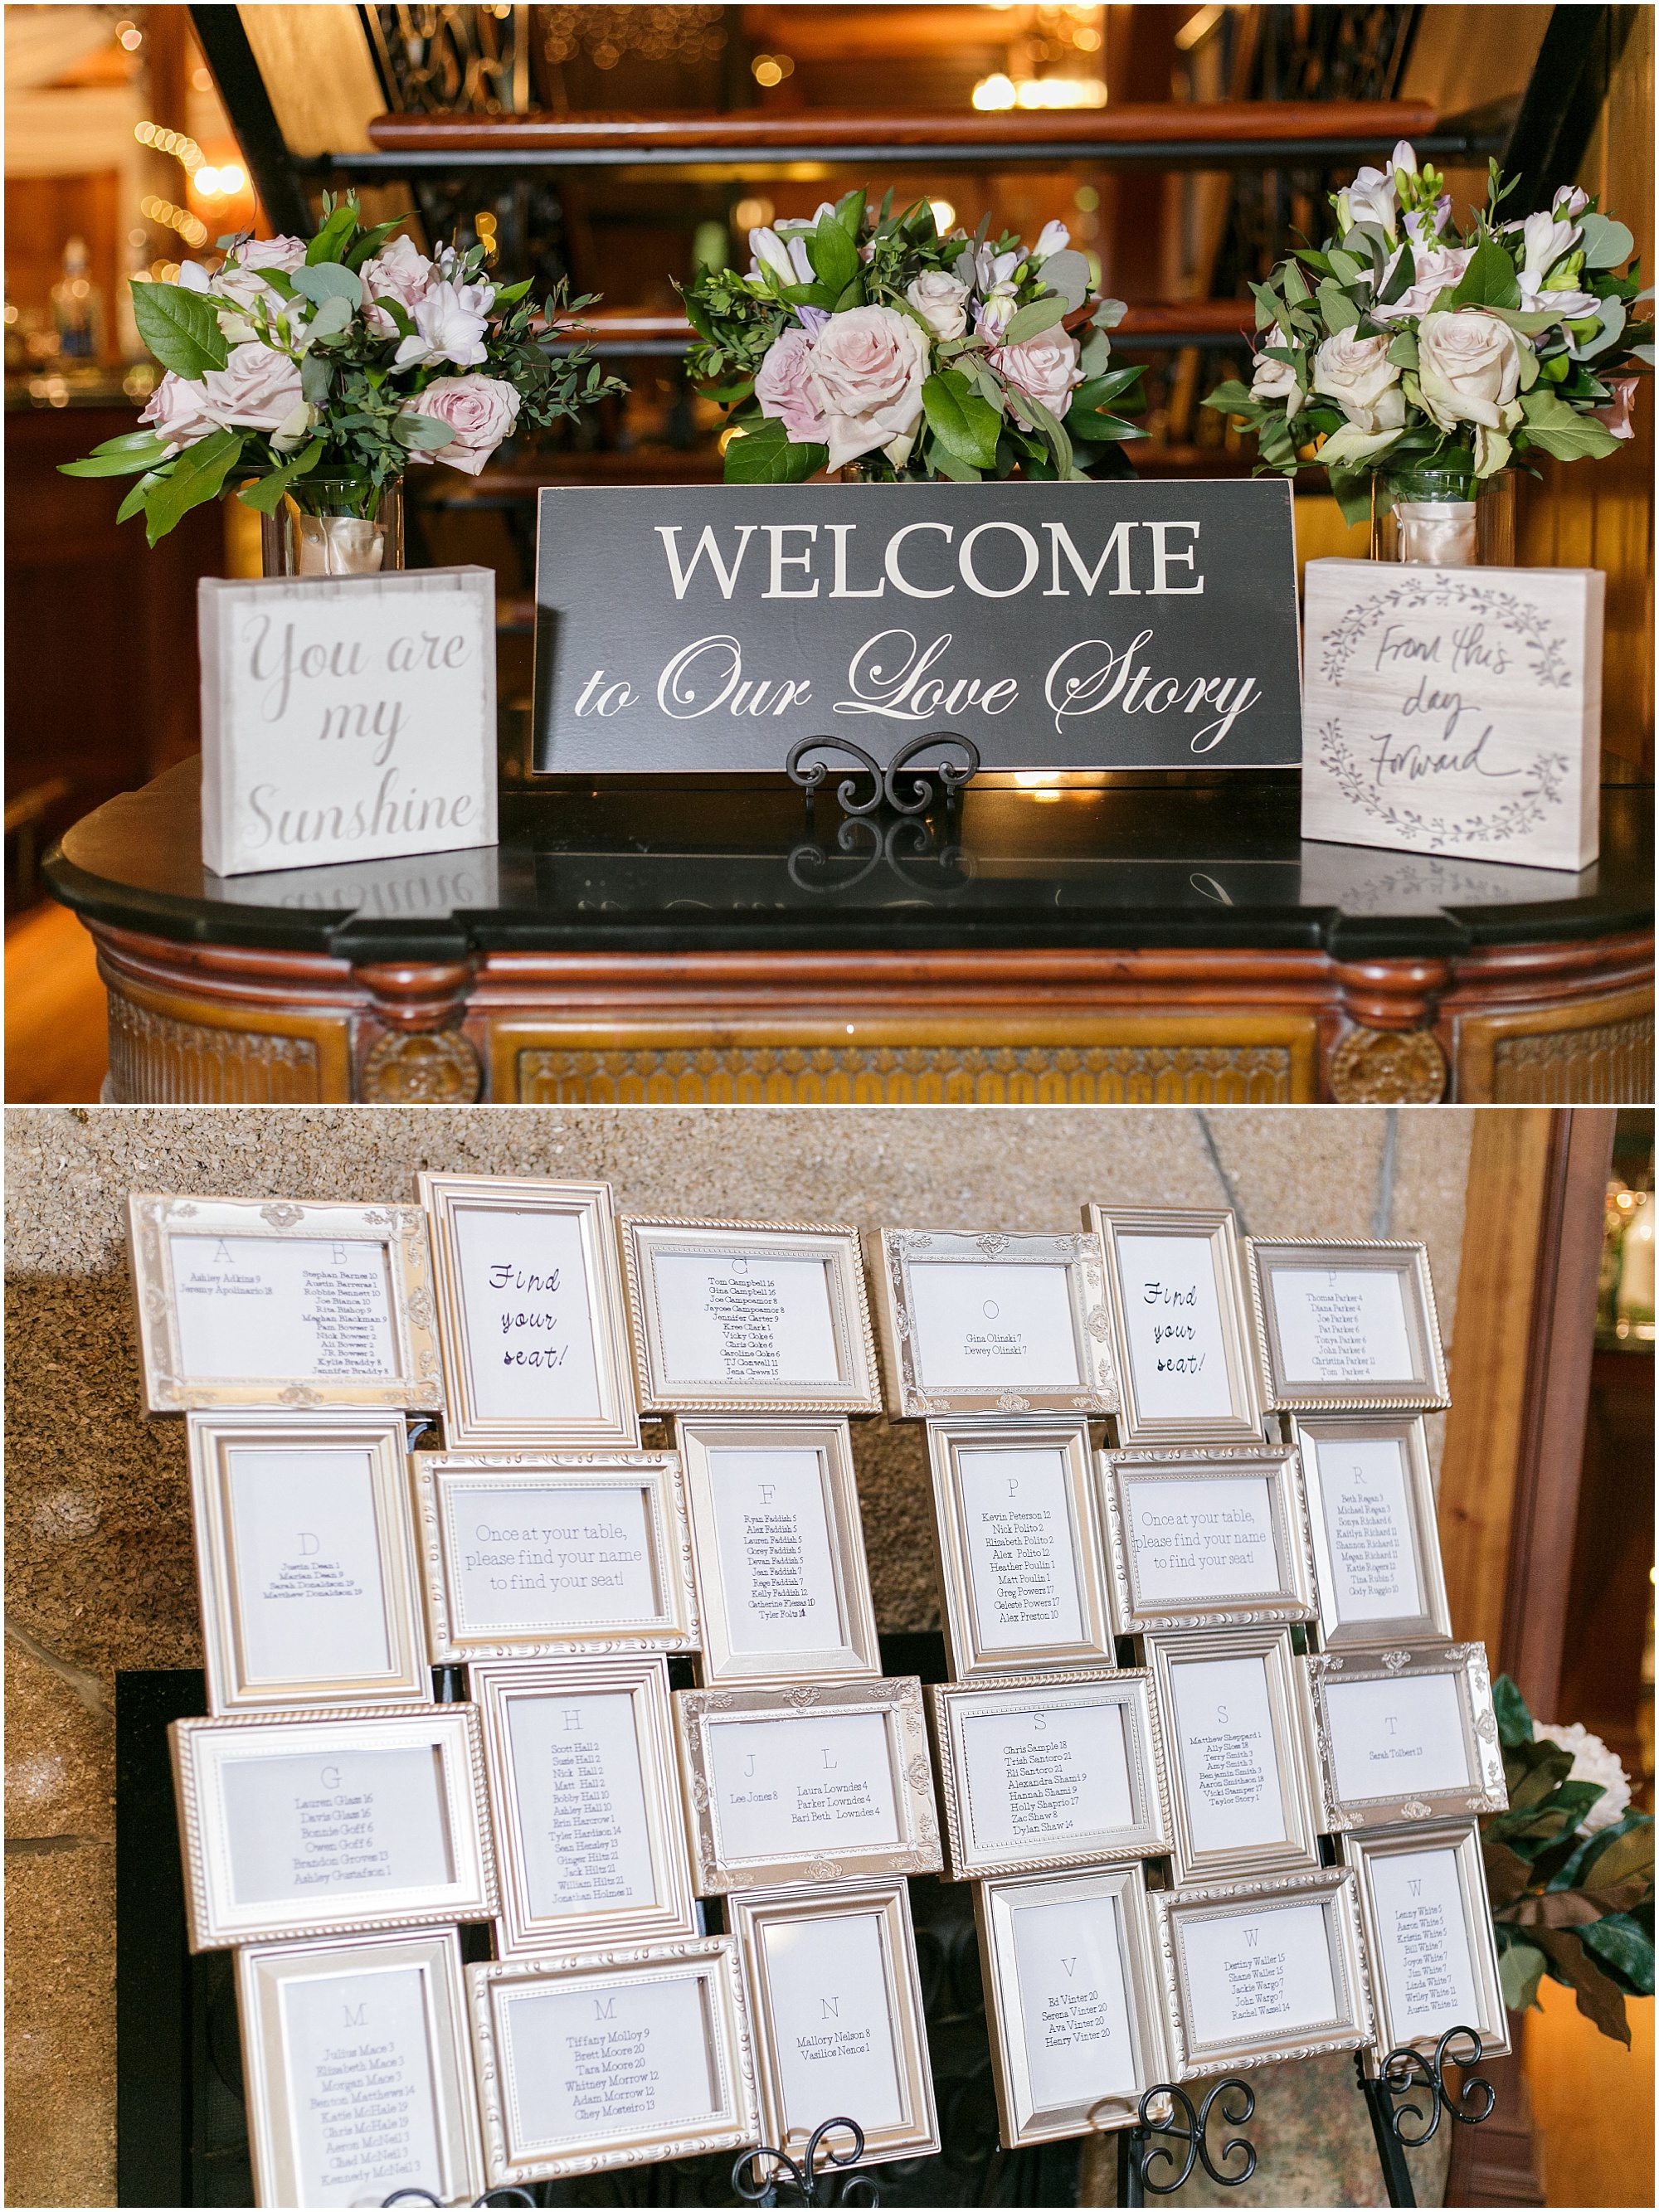 Welcome sign and table seating chart made of different picture frames.